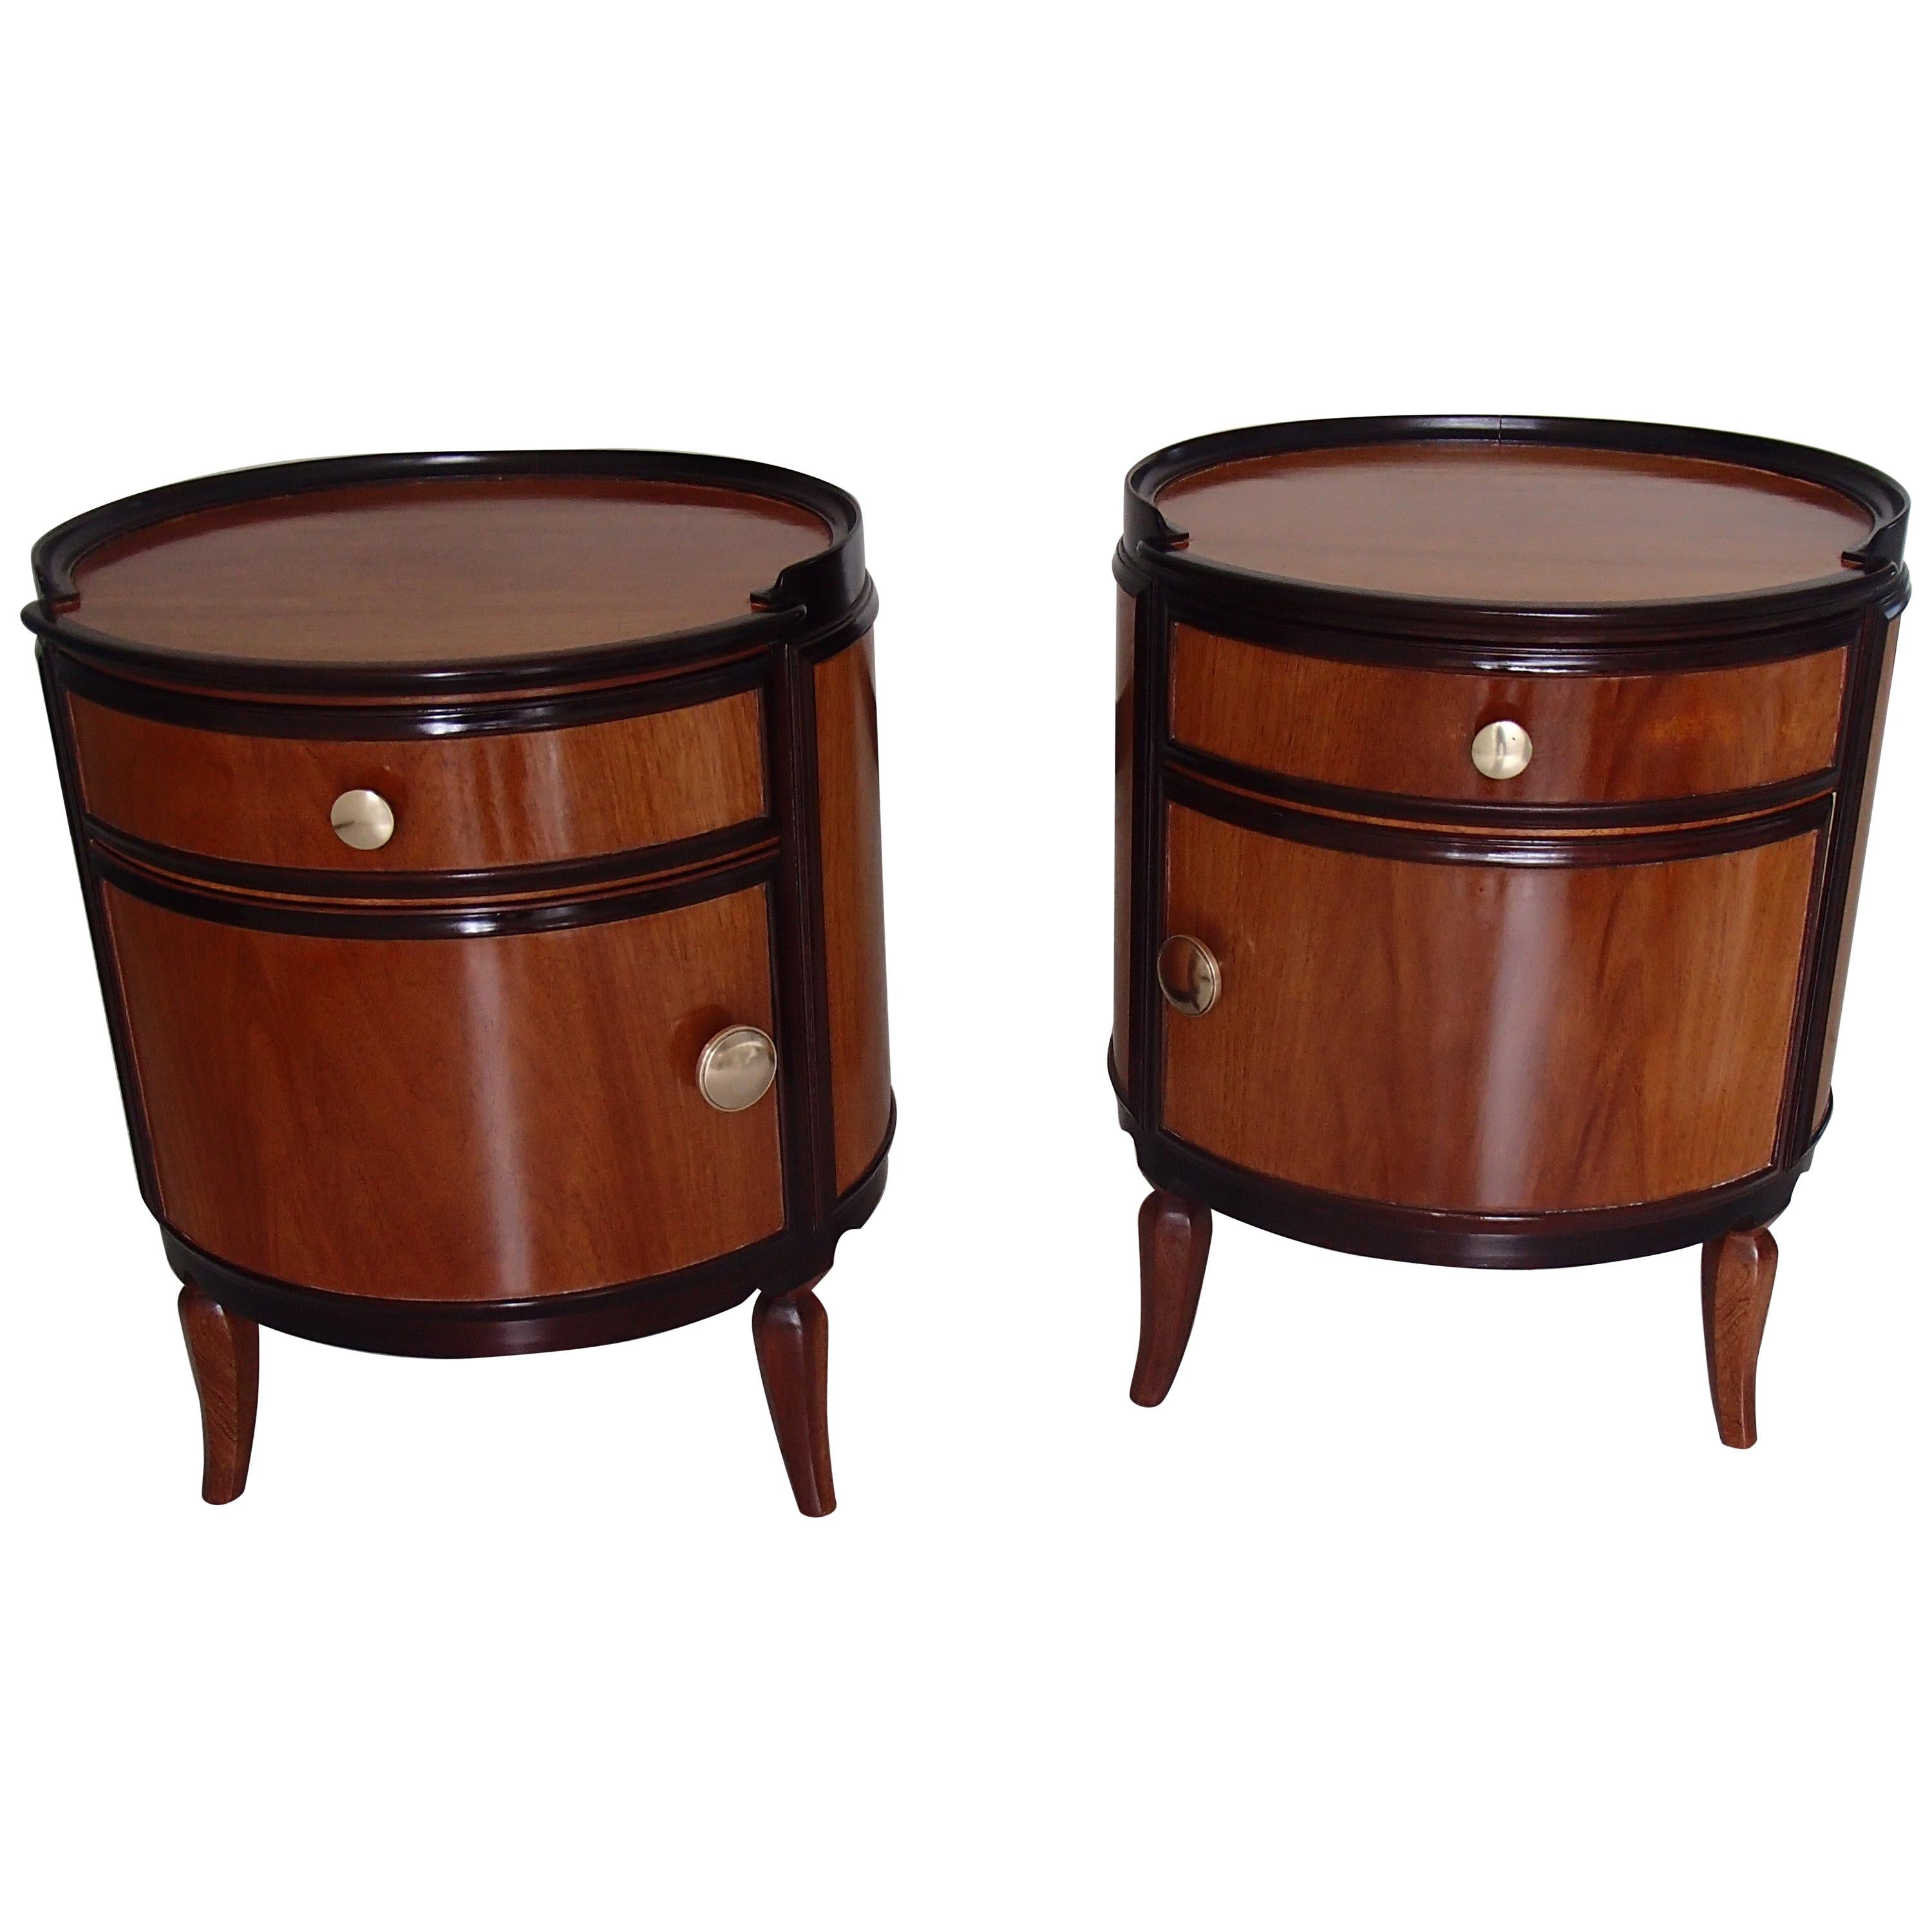 1920 This Pair Round of Full Mahogany Side Tables Nightstands with Brass Knobs